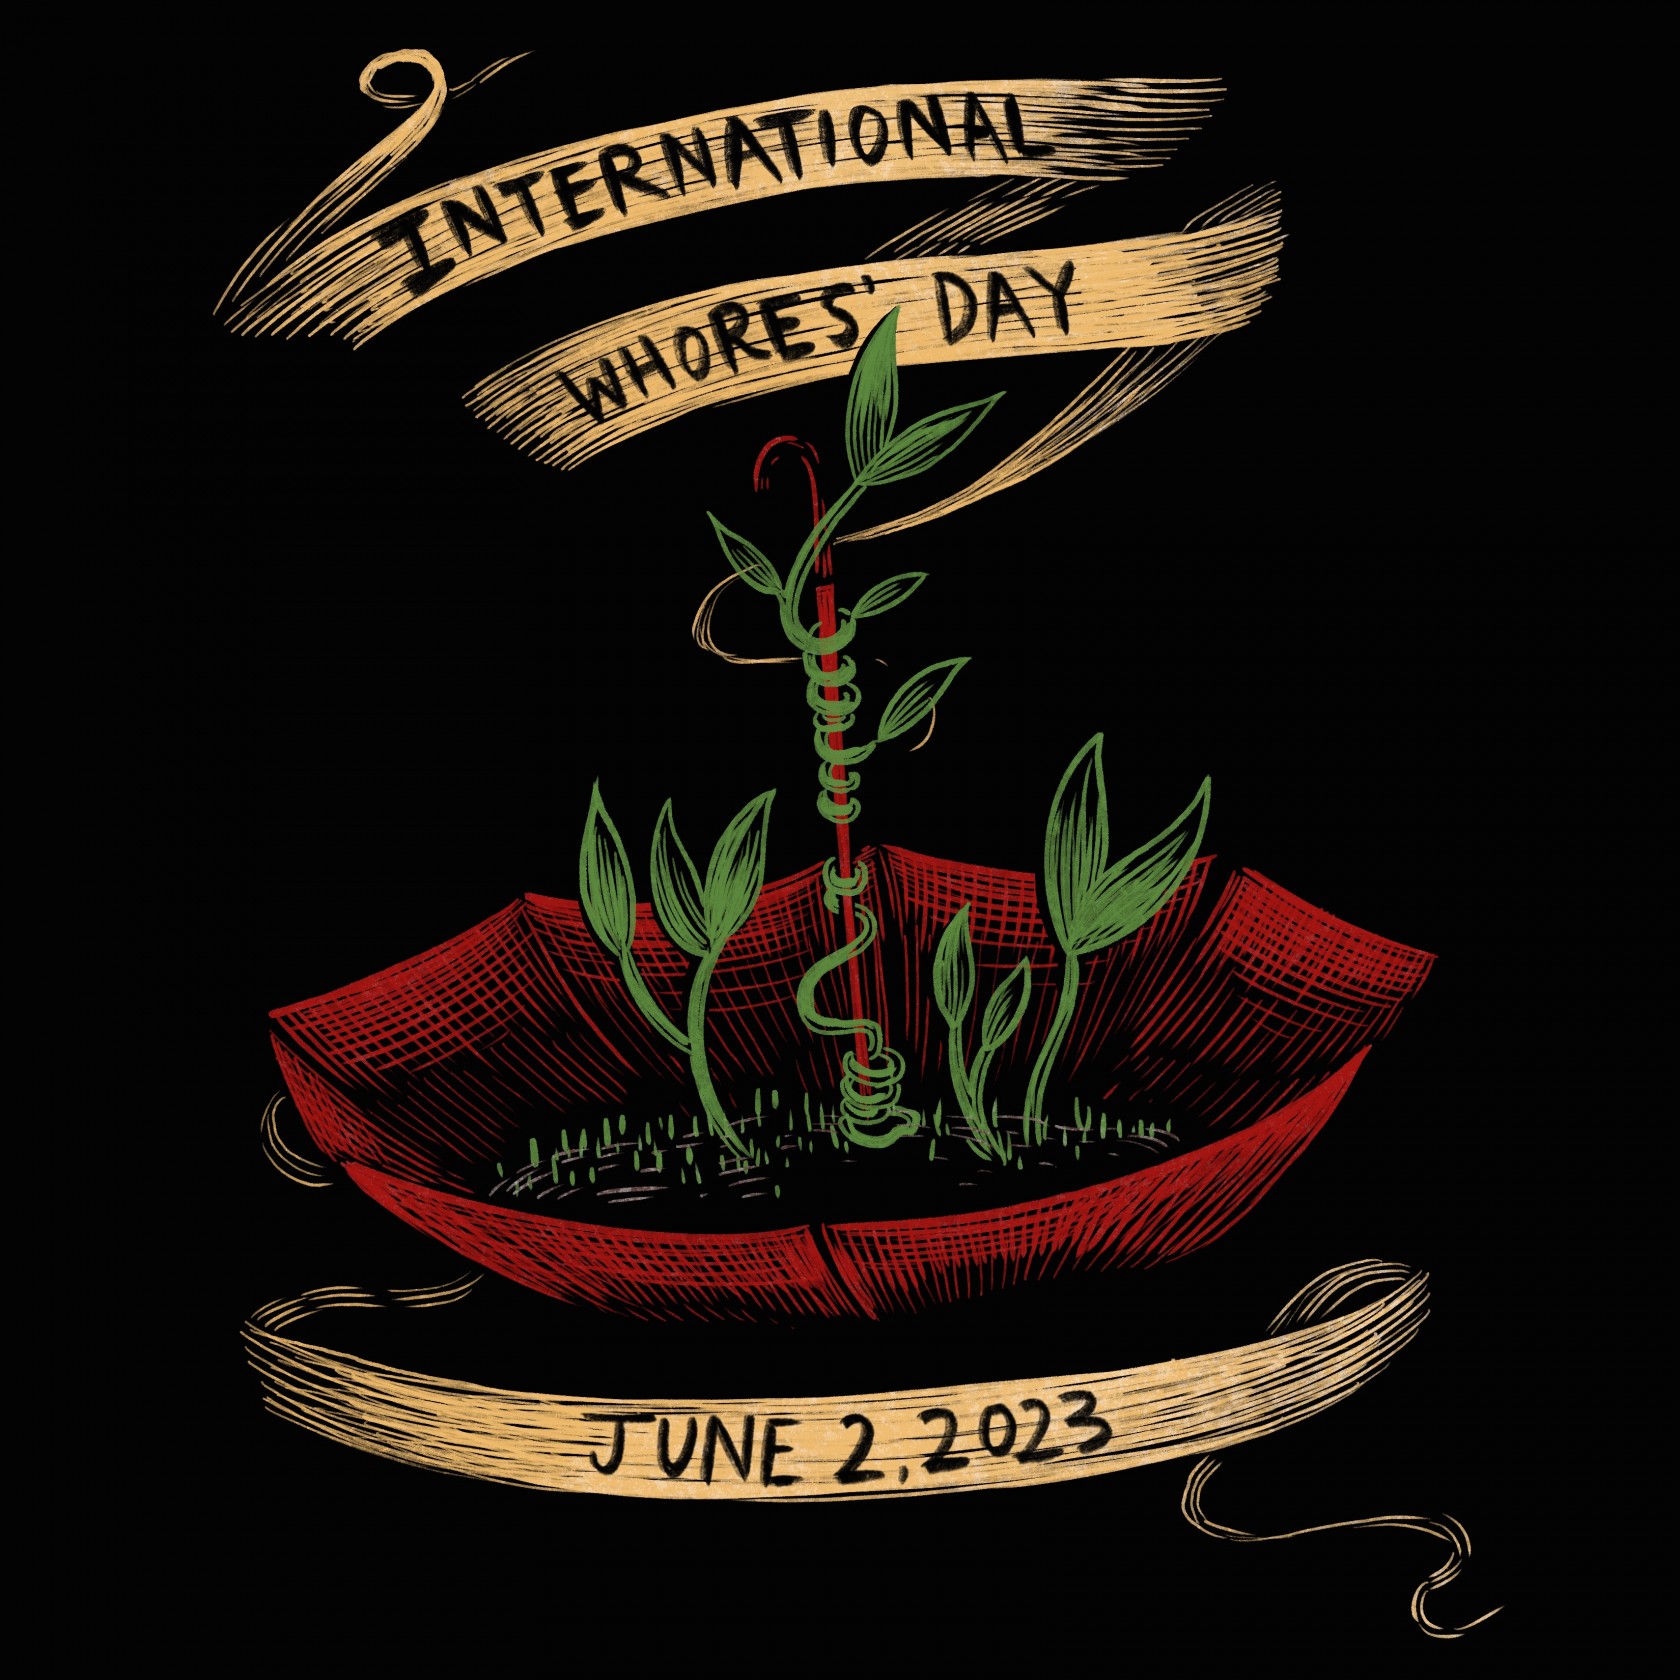 International Whores’ Day 2023